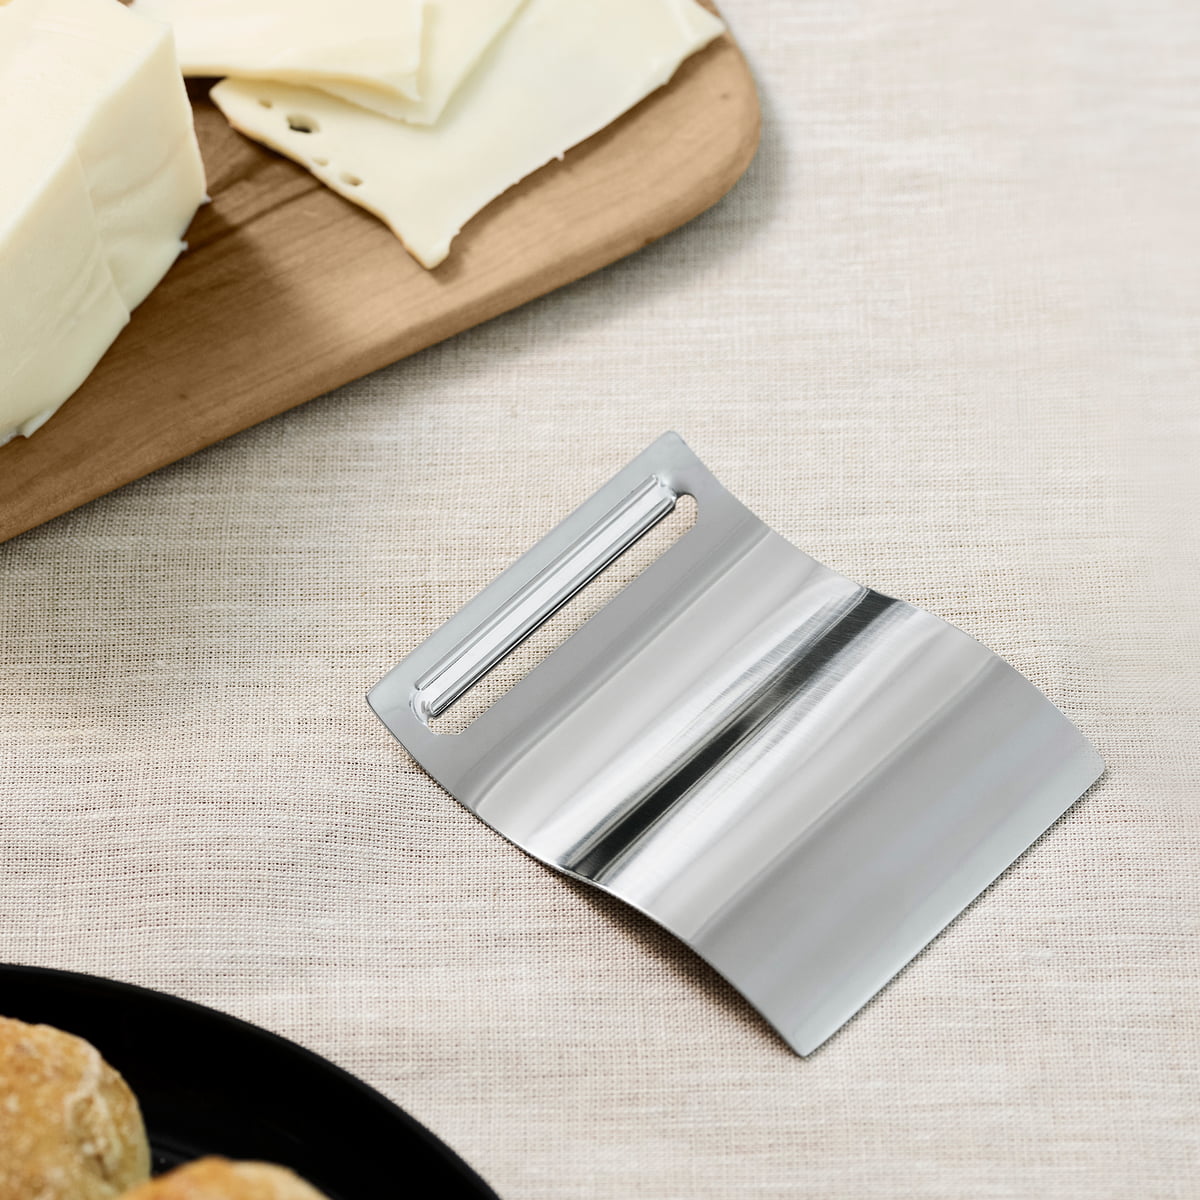 Cheese Slicer Multifunction Cheese Butter Cutter Cheese Shaver